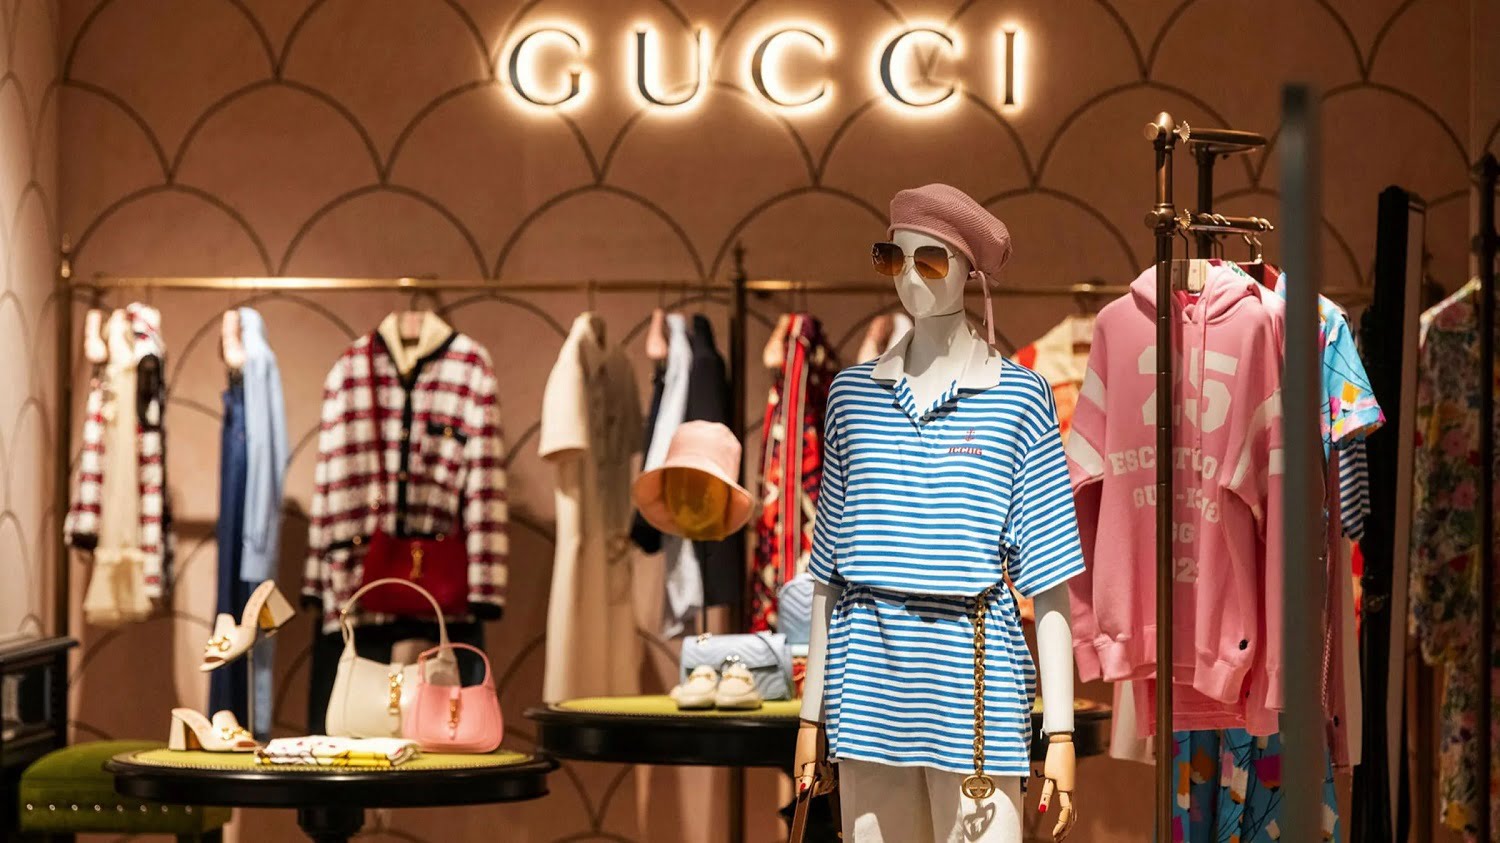 Gucci plans to start accepting Bitcoin at select stores